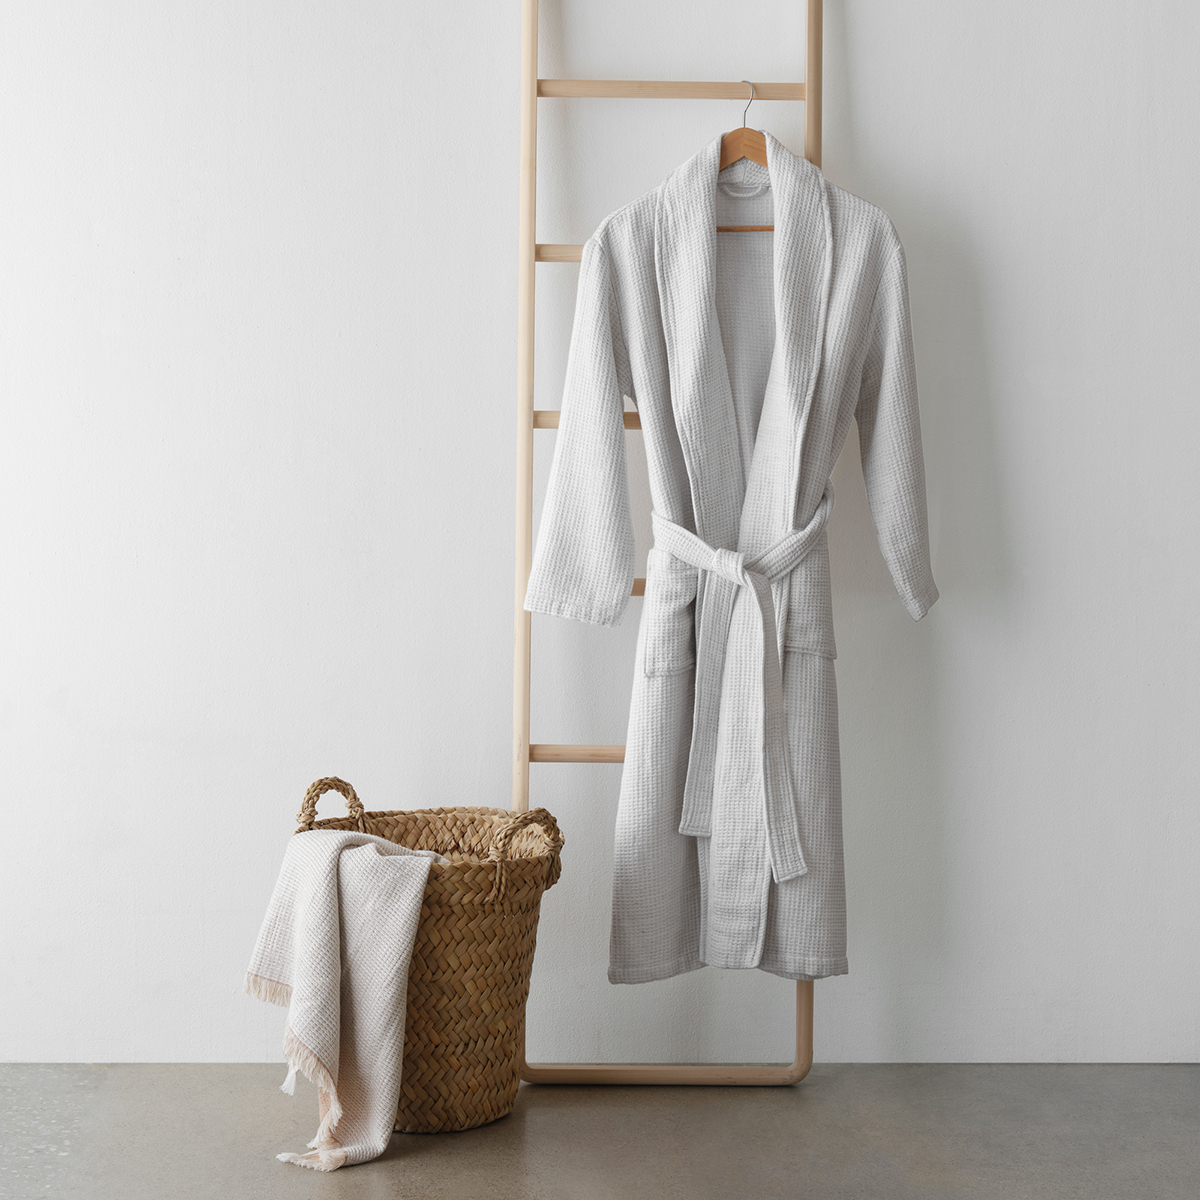 The Citizenry Aegean Cotton Bath Robe | The Container Store